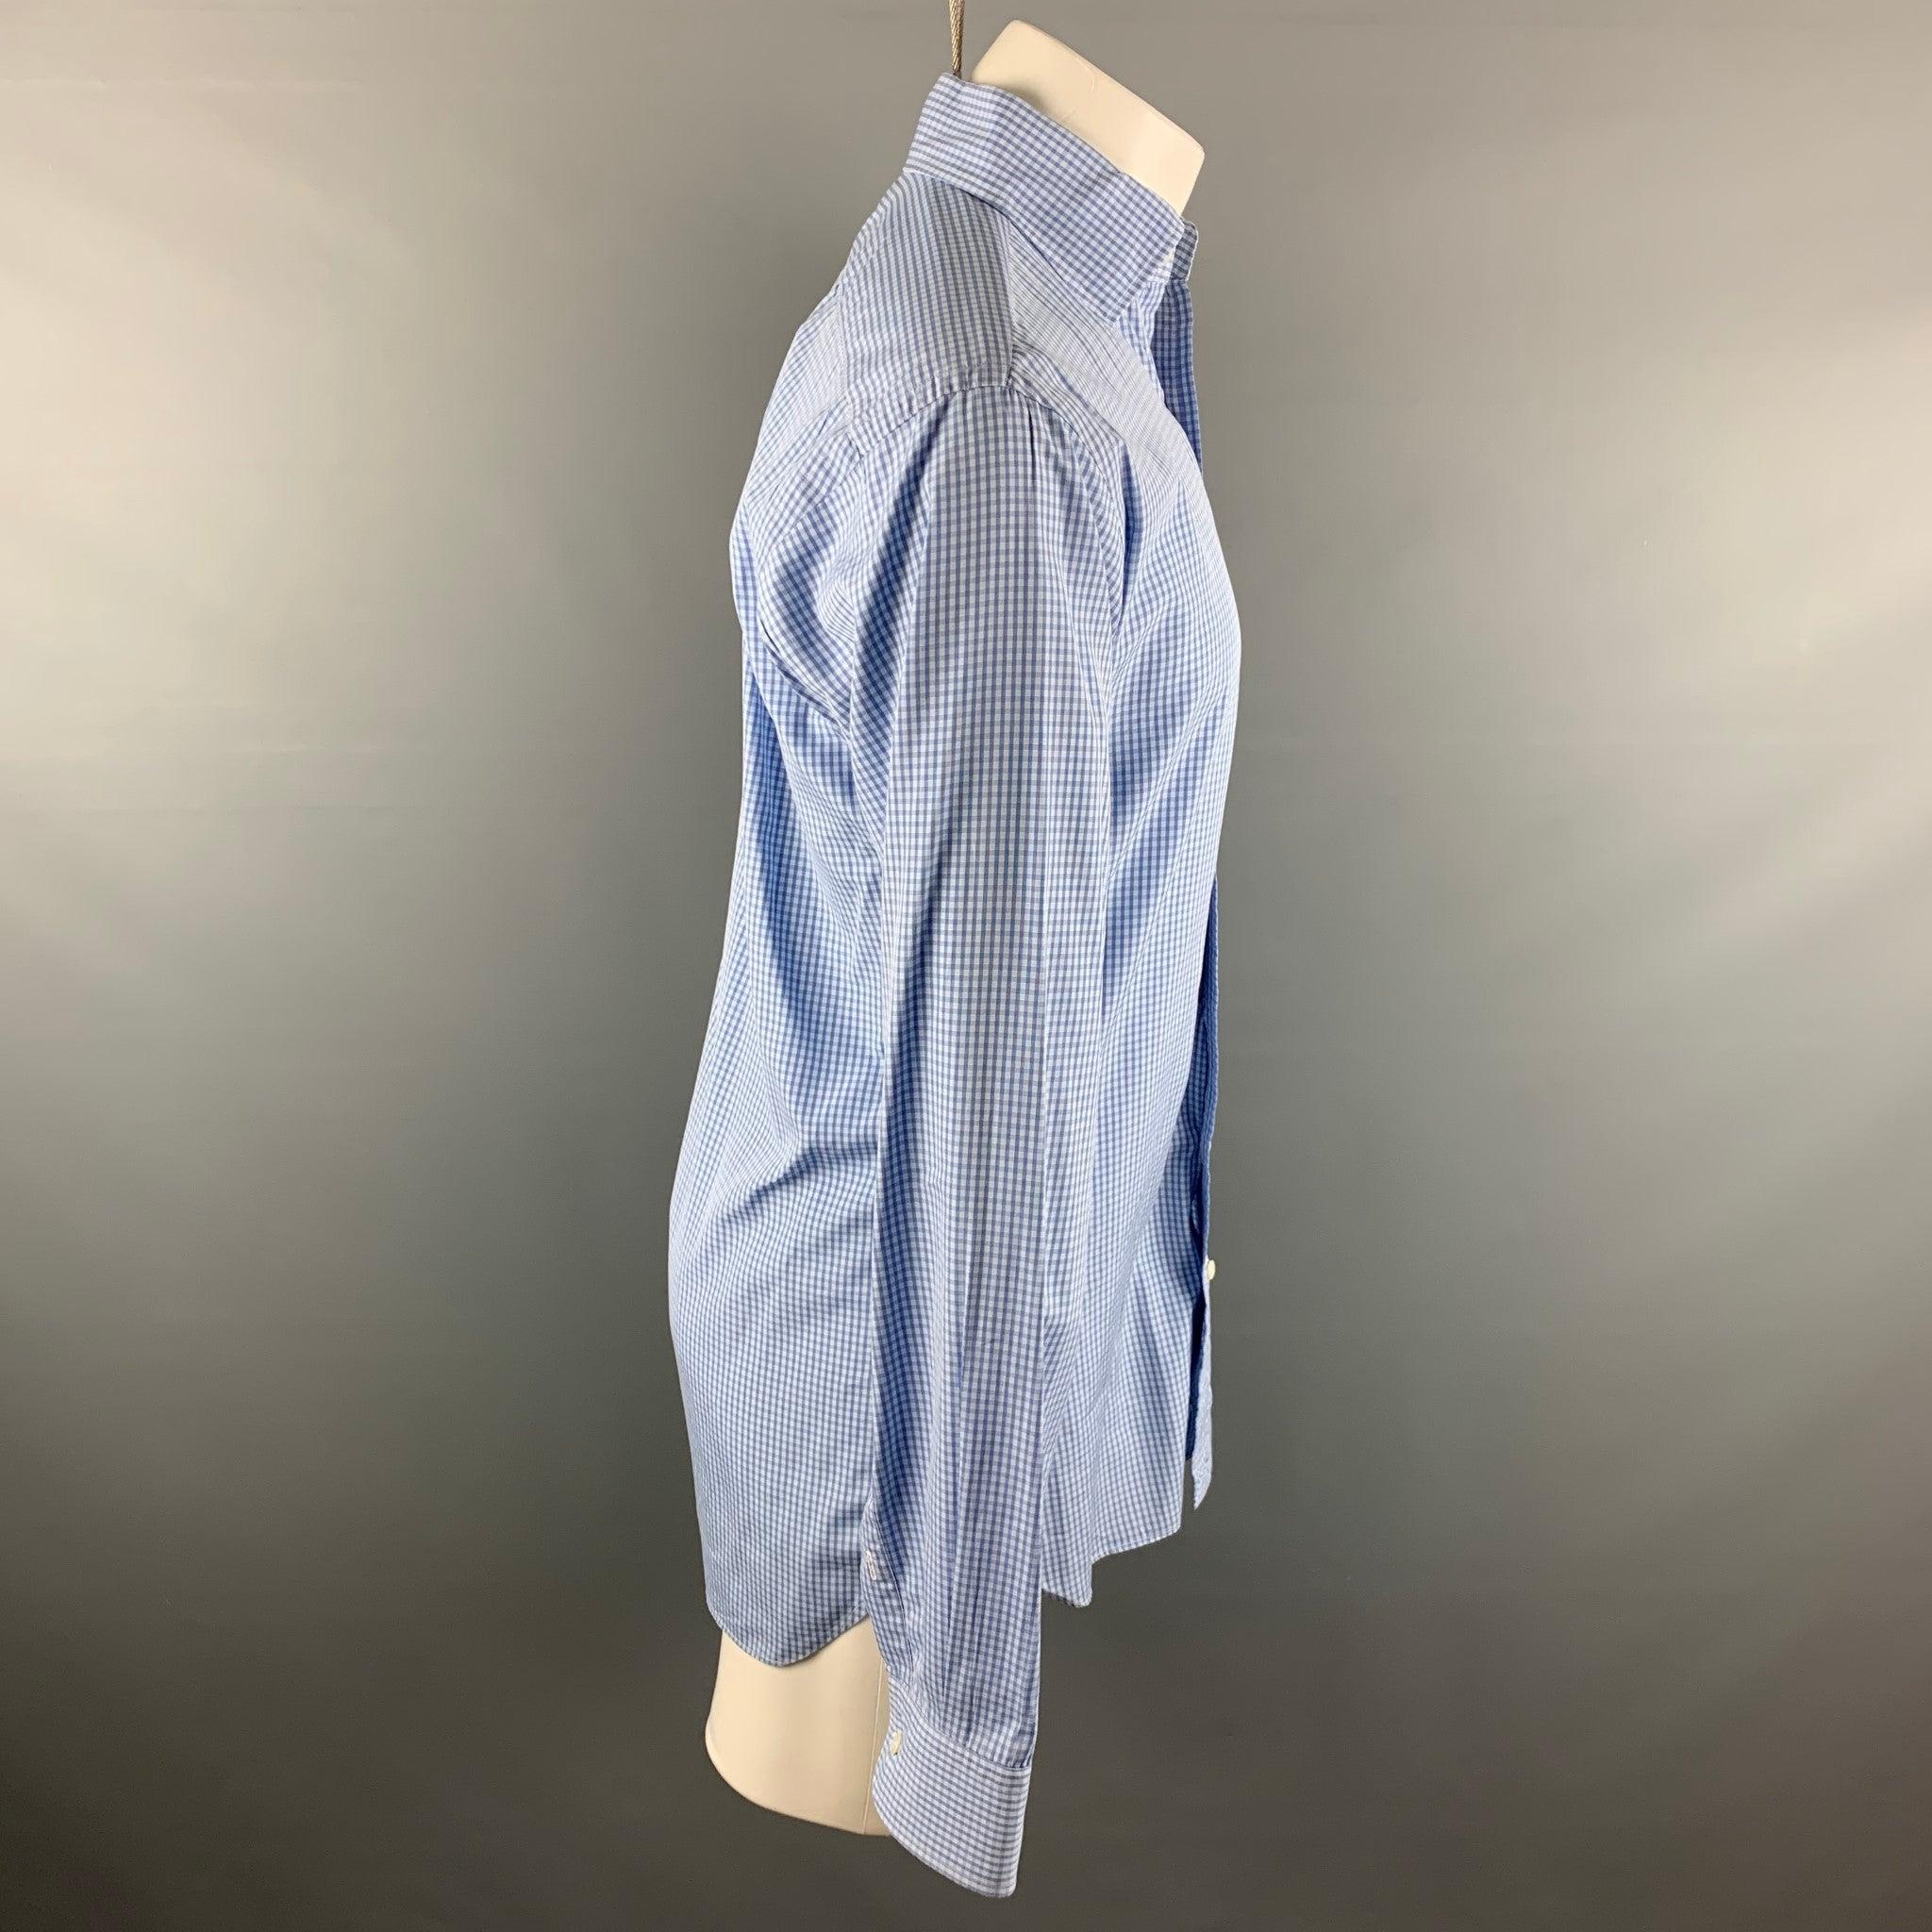 HAMILTON long sleeve button down shirt comes in blue and white checkered cotton, featuring a spread collar and a button closure.
Very Good Pre-Owned Condition. 

Marked:   M 

Measurements: 
 
Shoulder: 18 inches Chest: 42 inches Sleeve: 27 inches